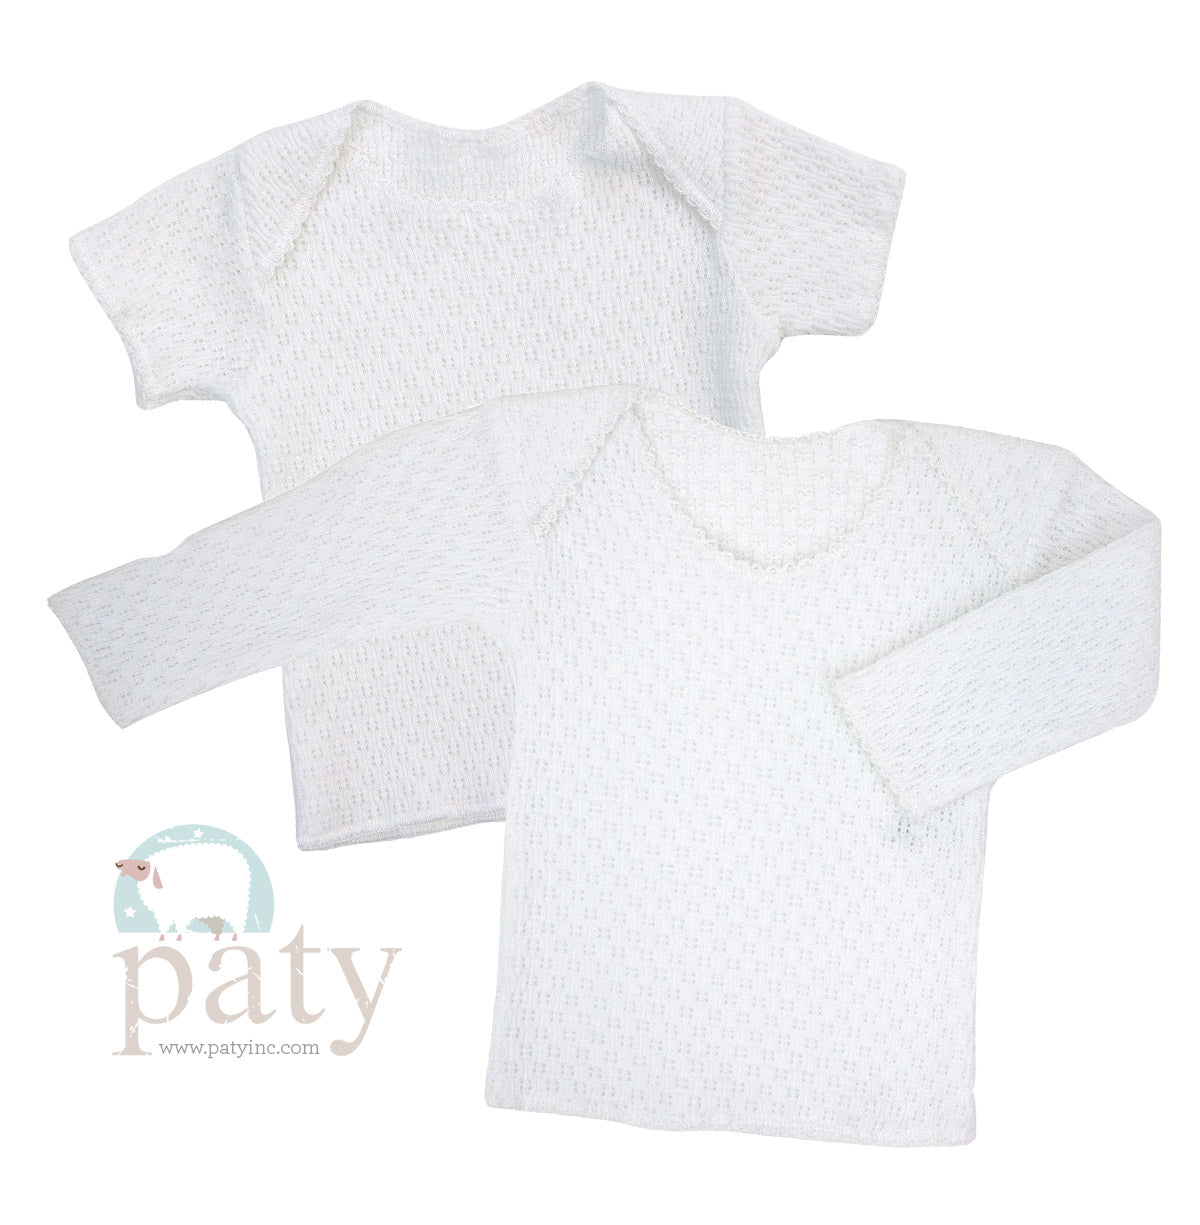 Signature Paty Top Baby Gown    - Chickie Collective